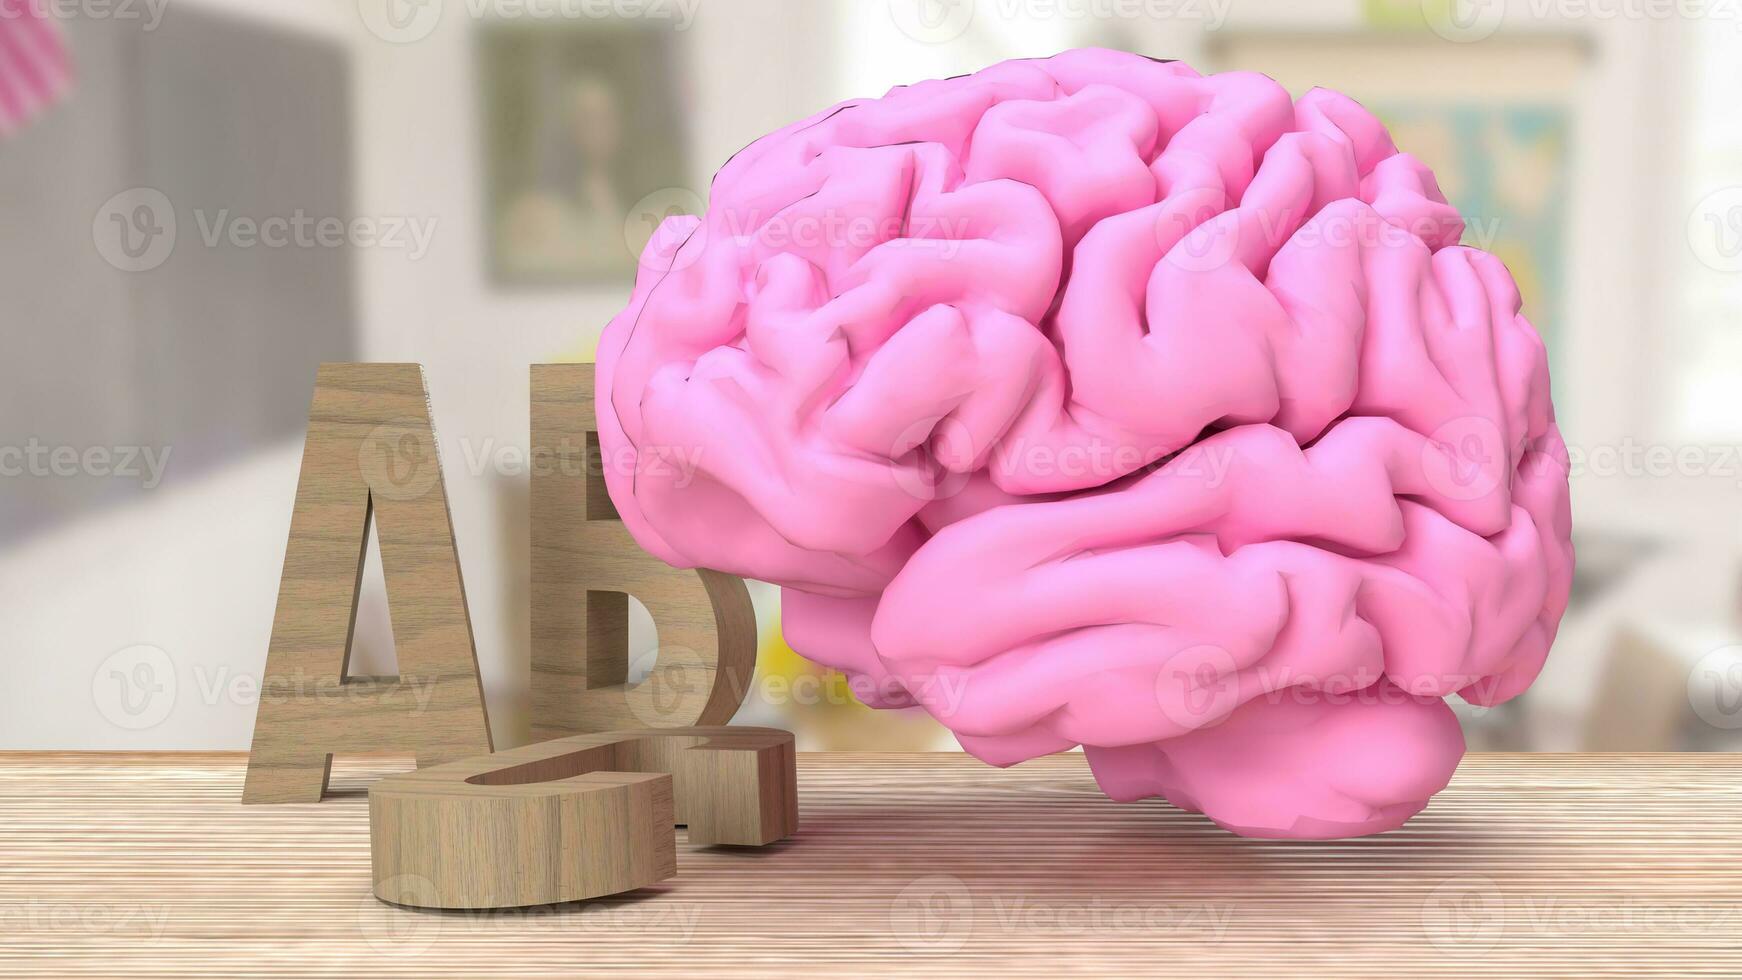 The alphabet  and brain for education or sci concept 3d rendering photo